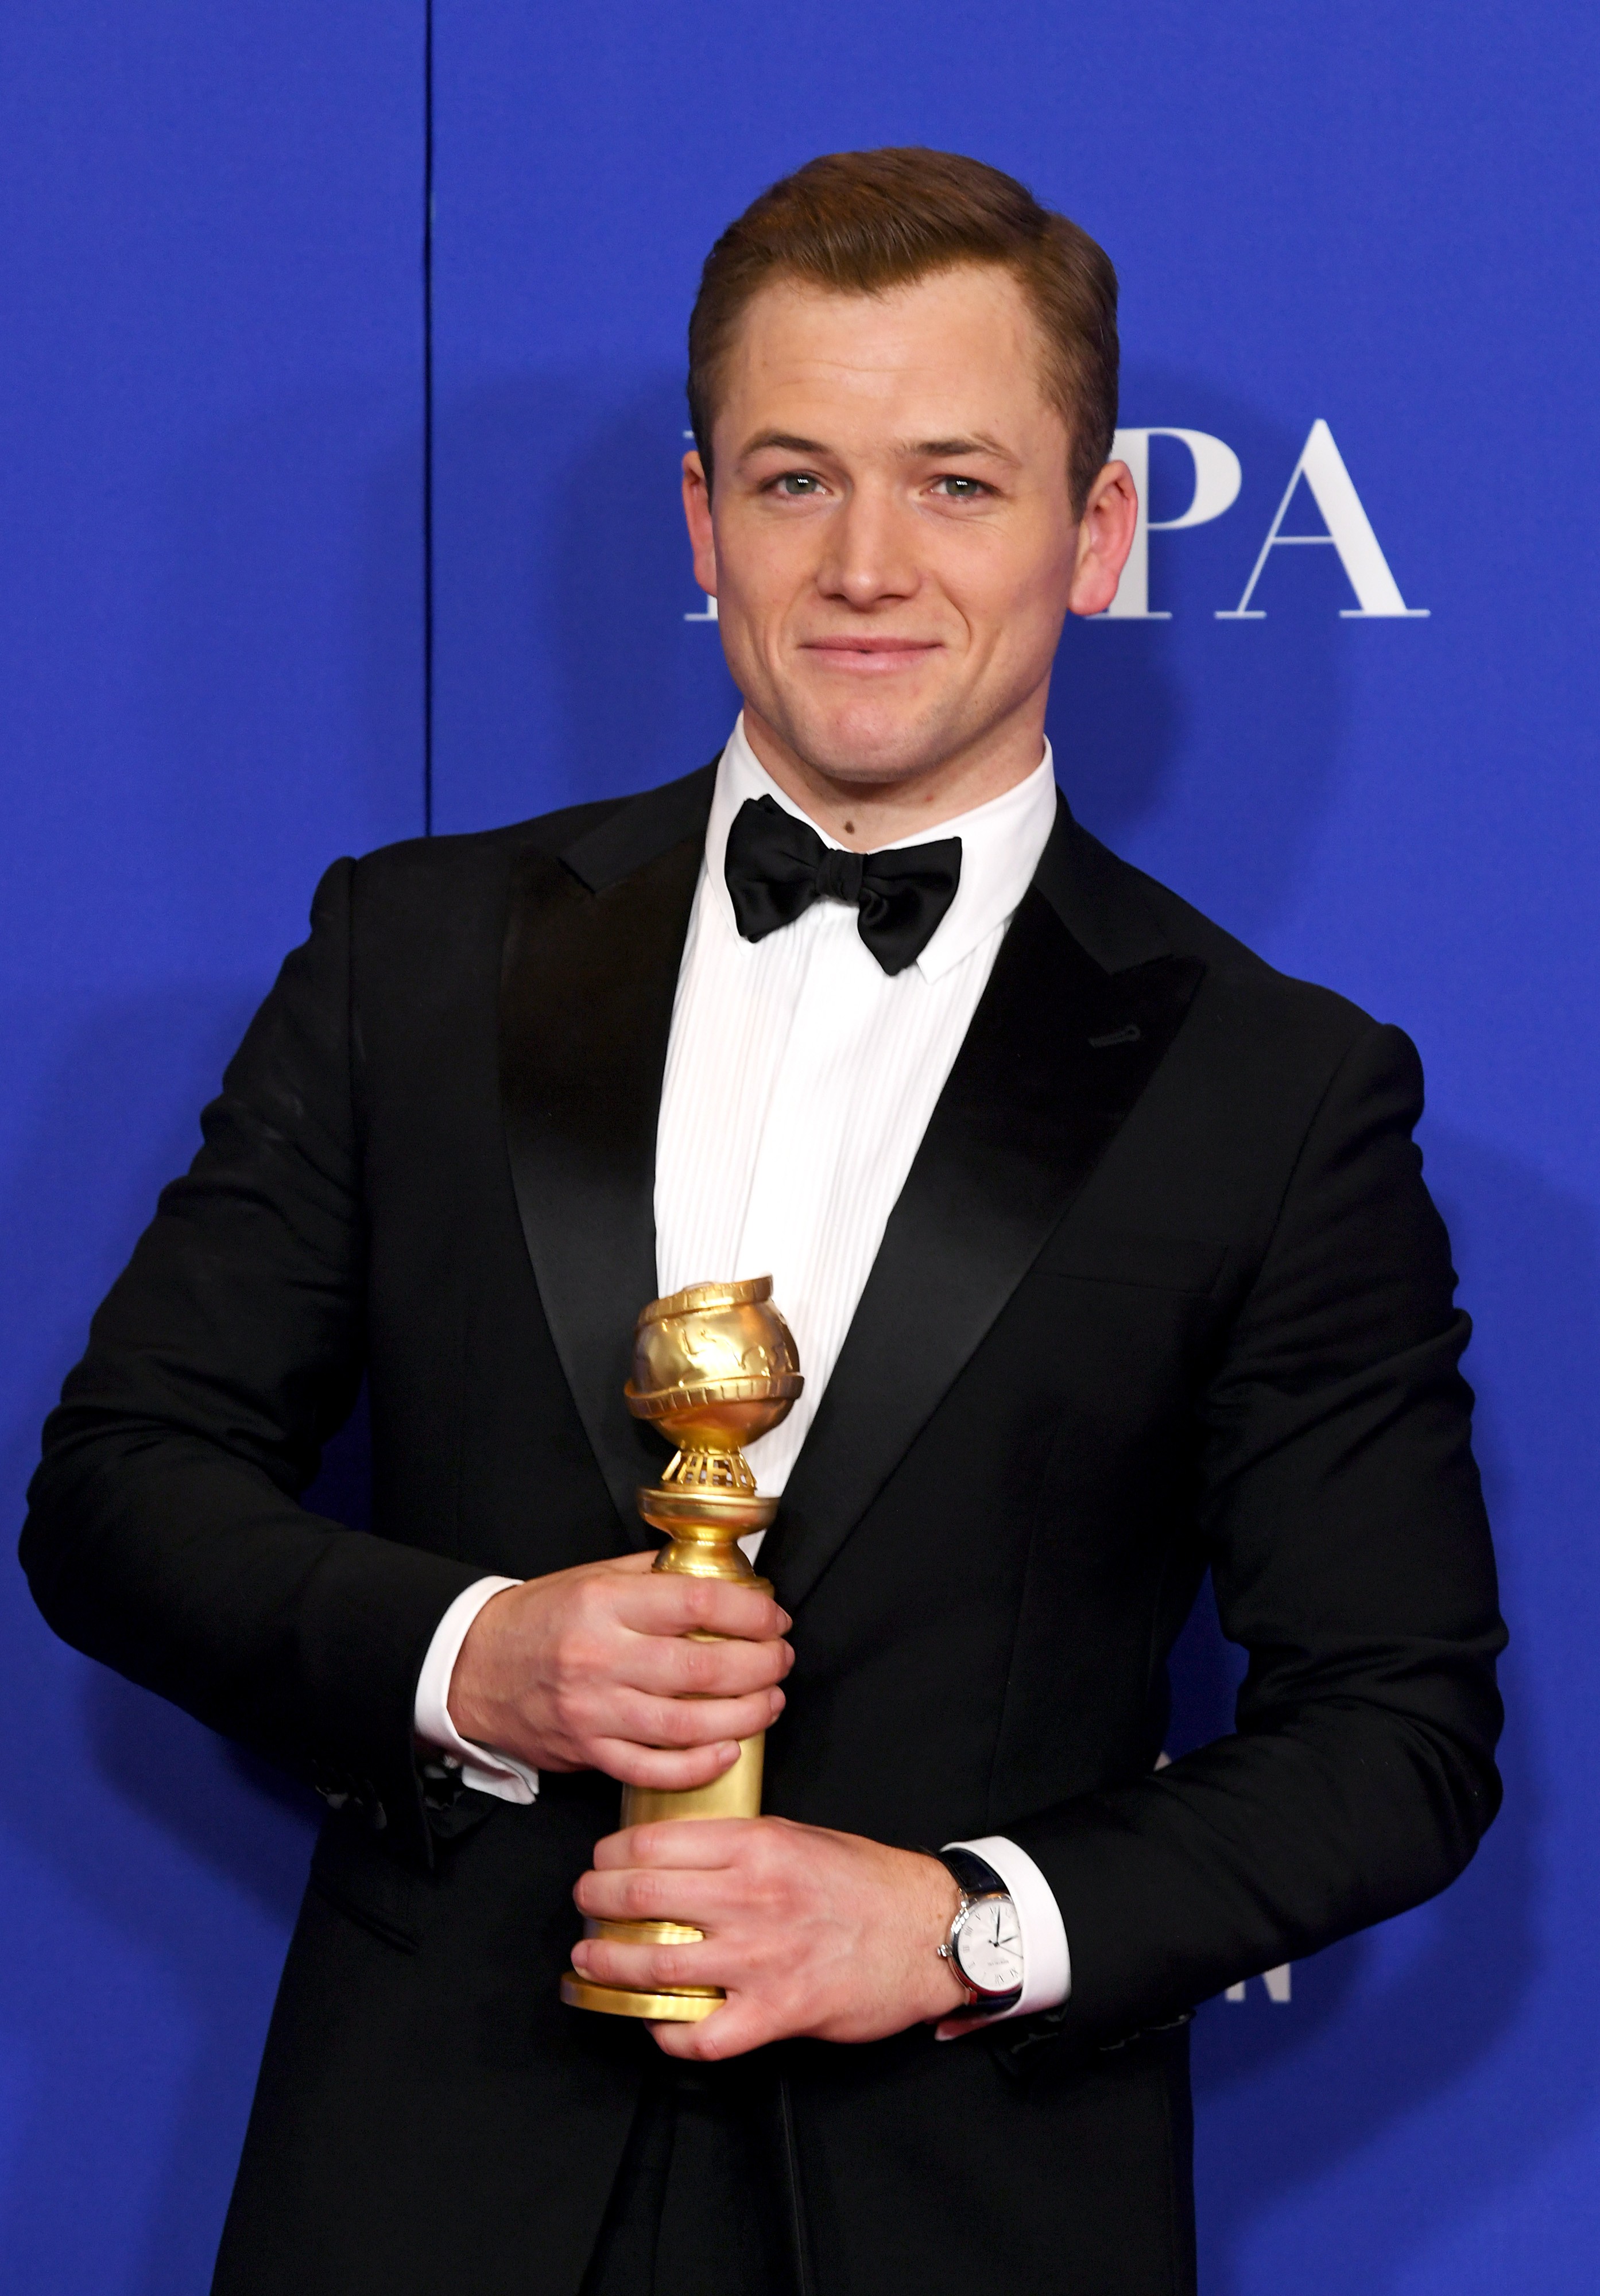 BEVERLY HILLS, CALIFORNIA - JANUARY 05: Taron Egerton, winner of Best Performance by an Actor in a Motion Picture - Musical or Comedy  for Rocketman, poses in the press room during the 77th Annual Golden Globe Awards at The Beverly Hilton Hotel on Januar (Foto: Getty Images)